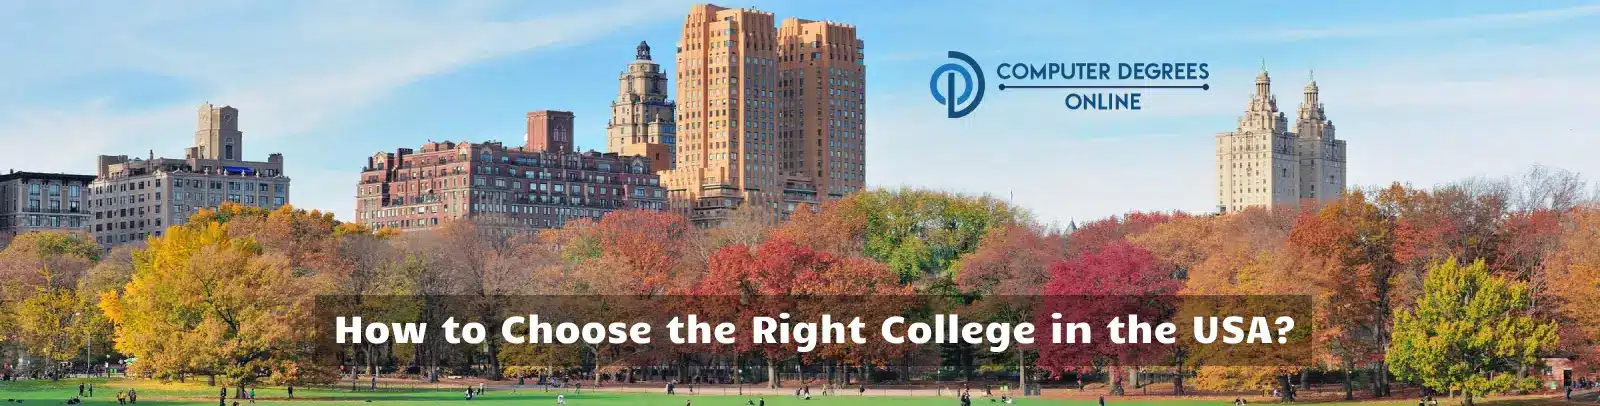 How to Choose the Right College in the USA?